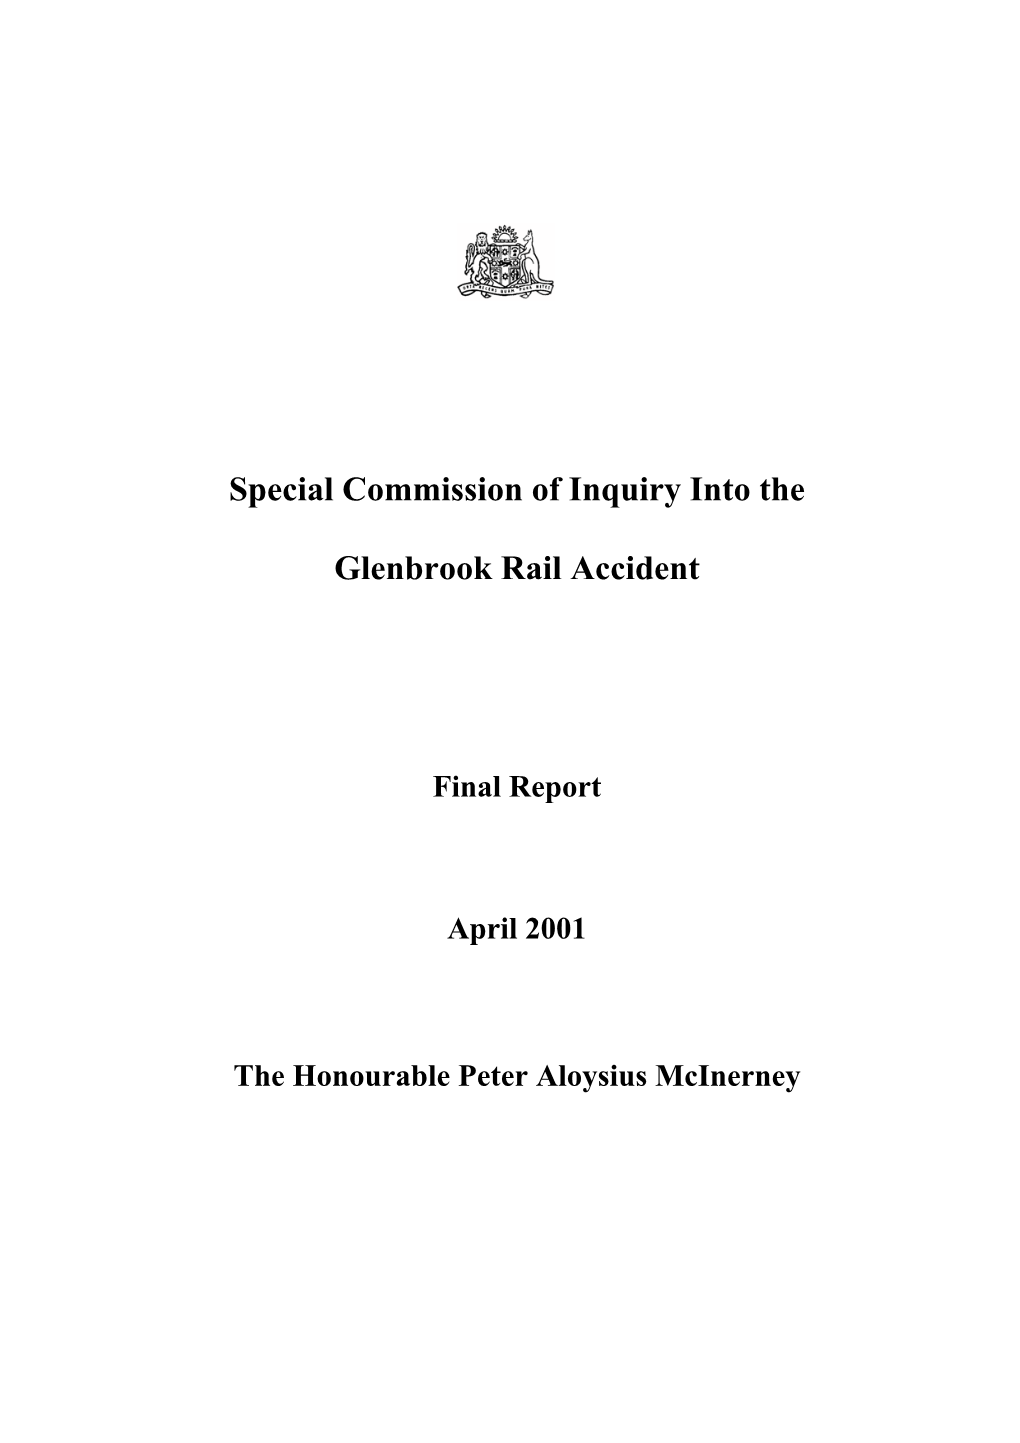 Special Commission of Inquiry Into the Glenbrook Rail Accident